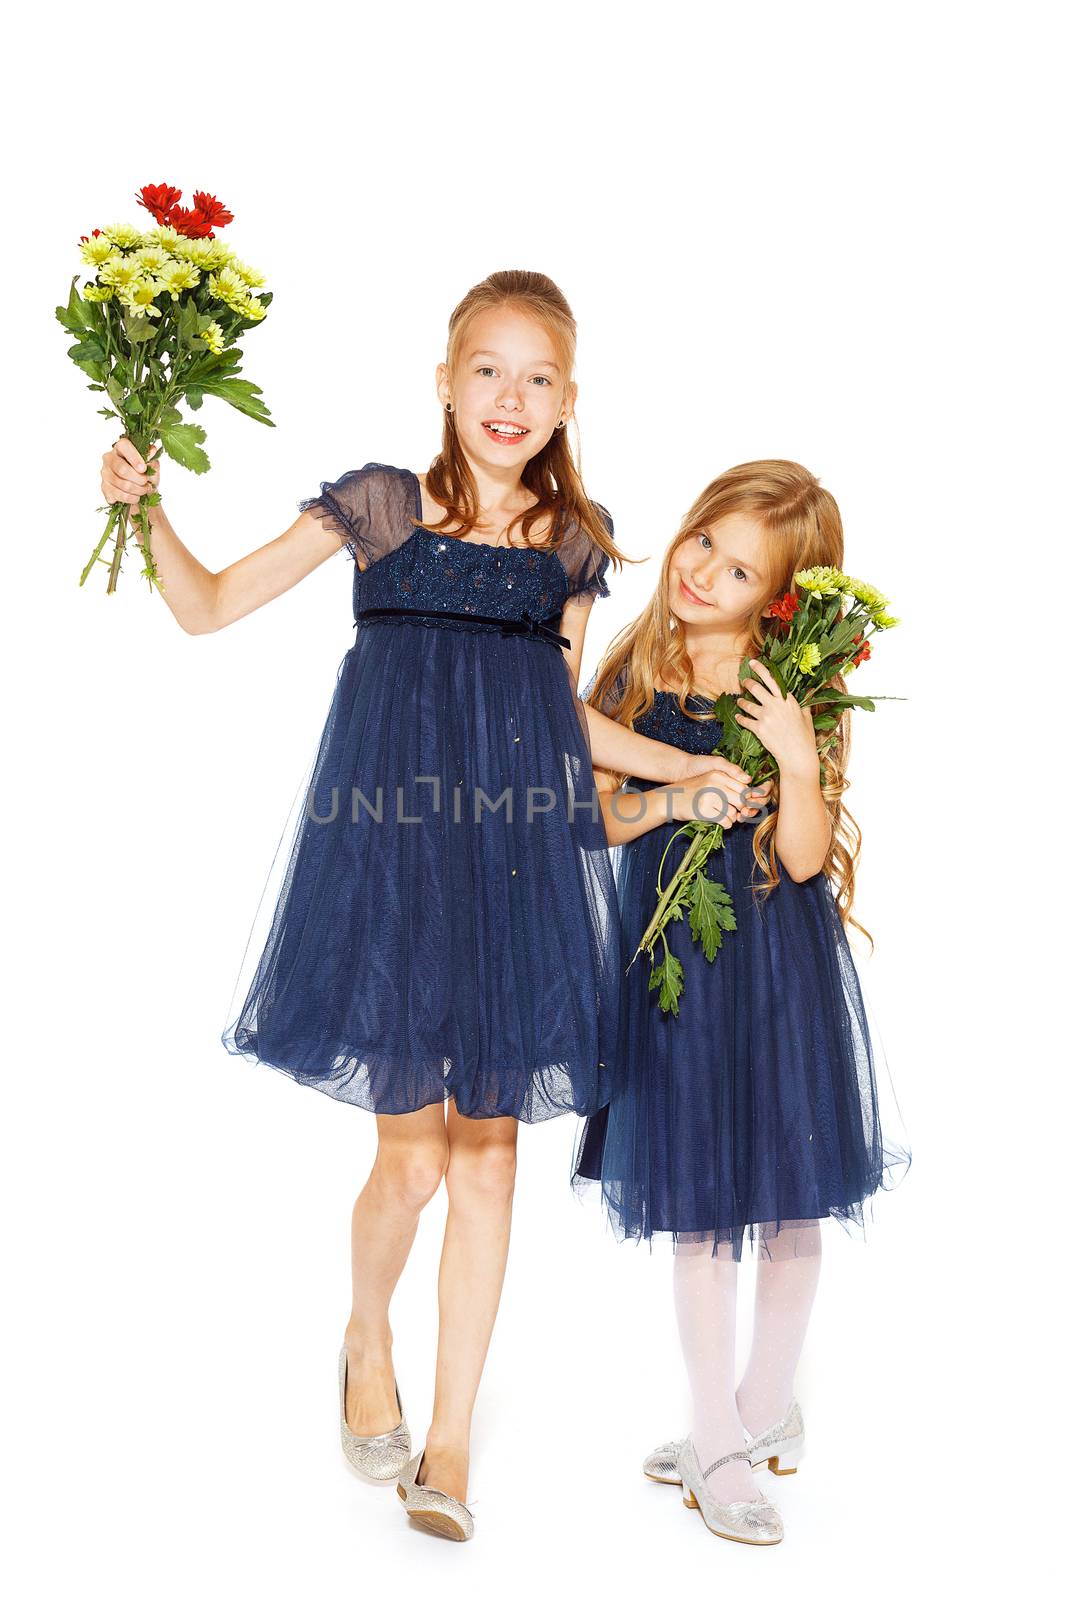 Two beautiful girls with a bouquet of flowers by gorov108